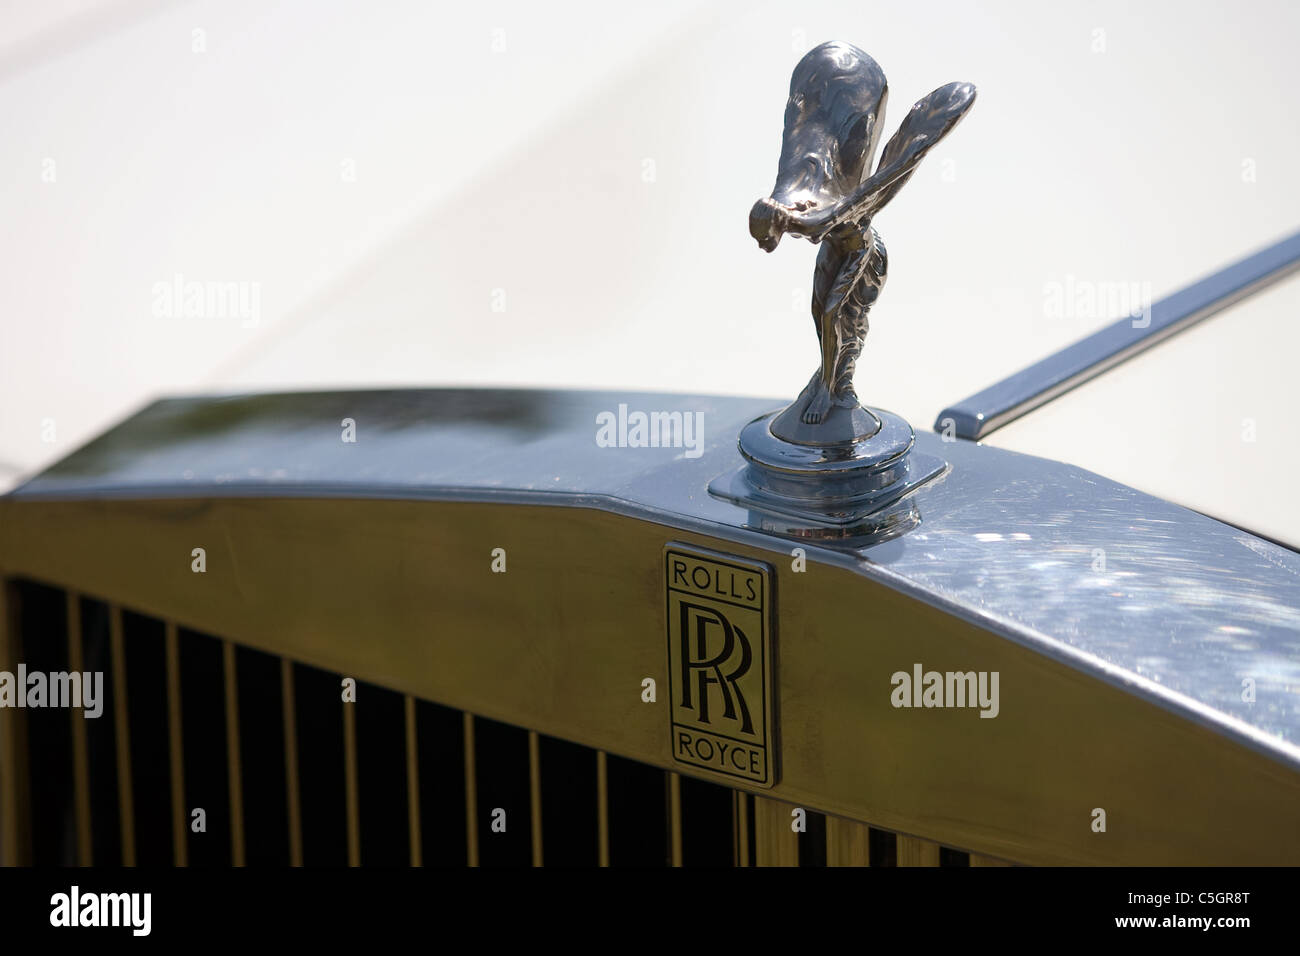 The front grill and hood ornament from a Rolls Royce. Stock Photo